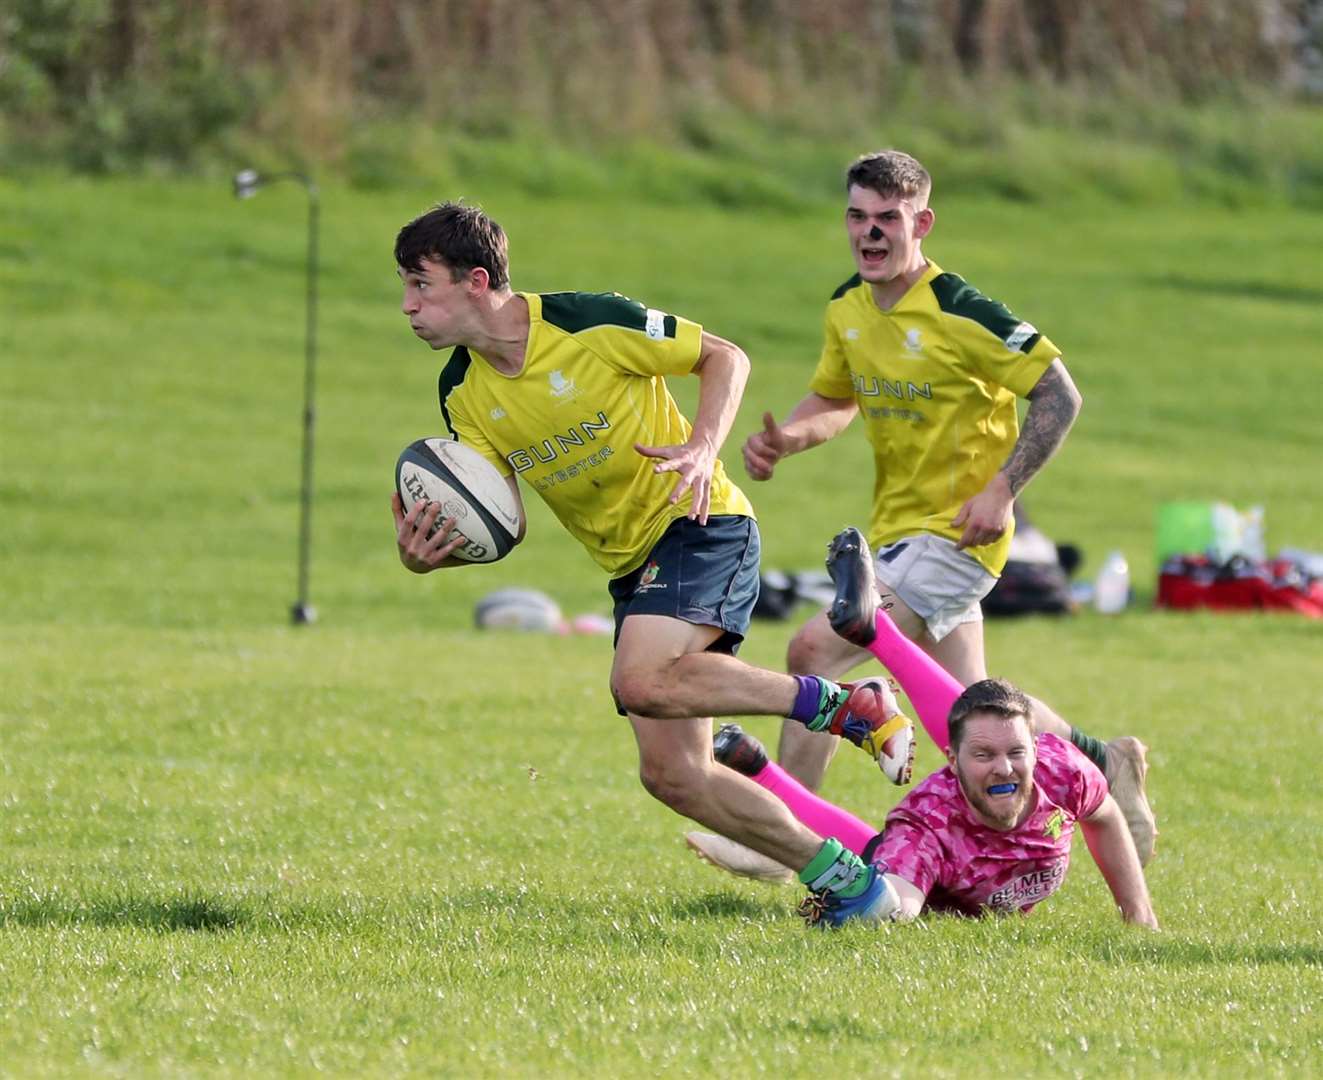 Ben Alba slips through a tackle to head for the try line, with Jack Macleod in support. Picture: James Gunn